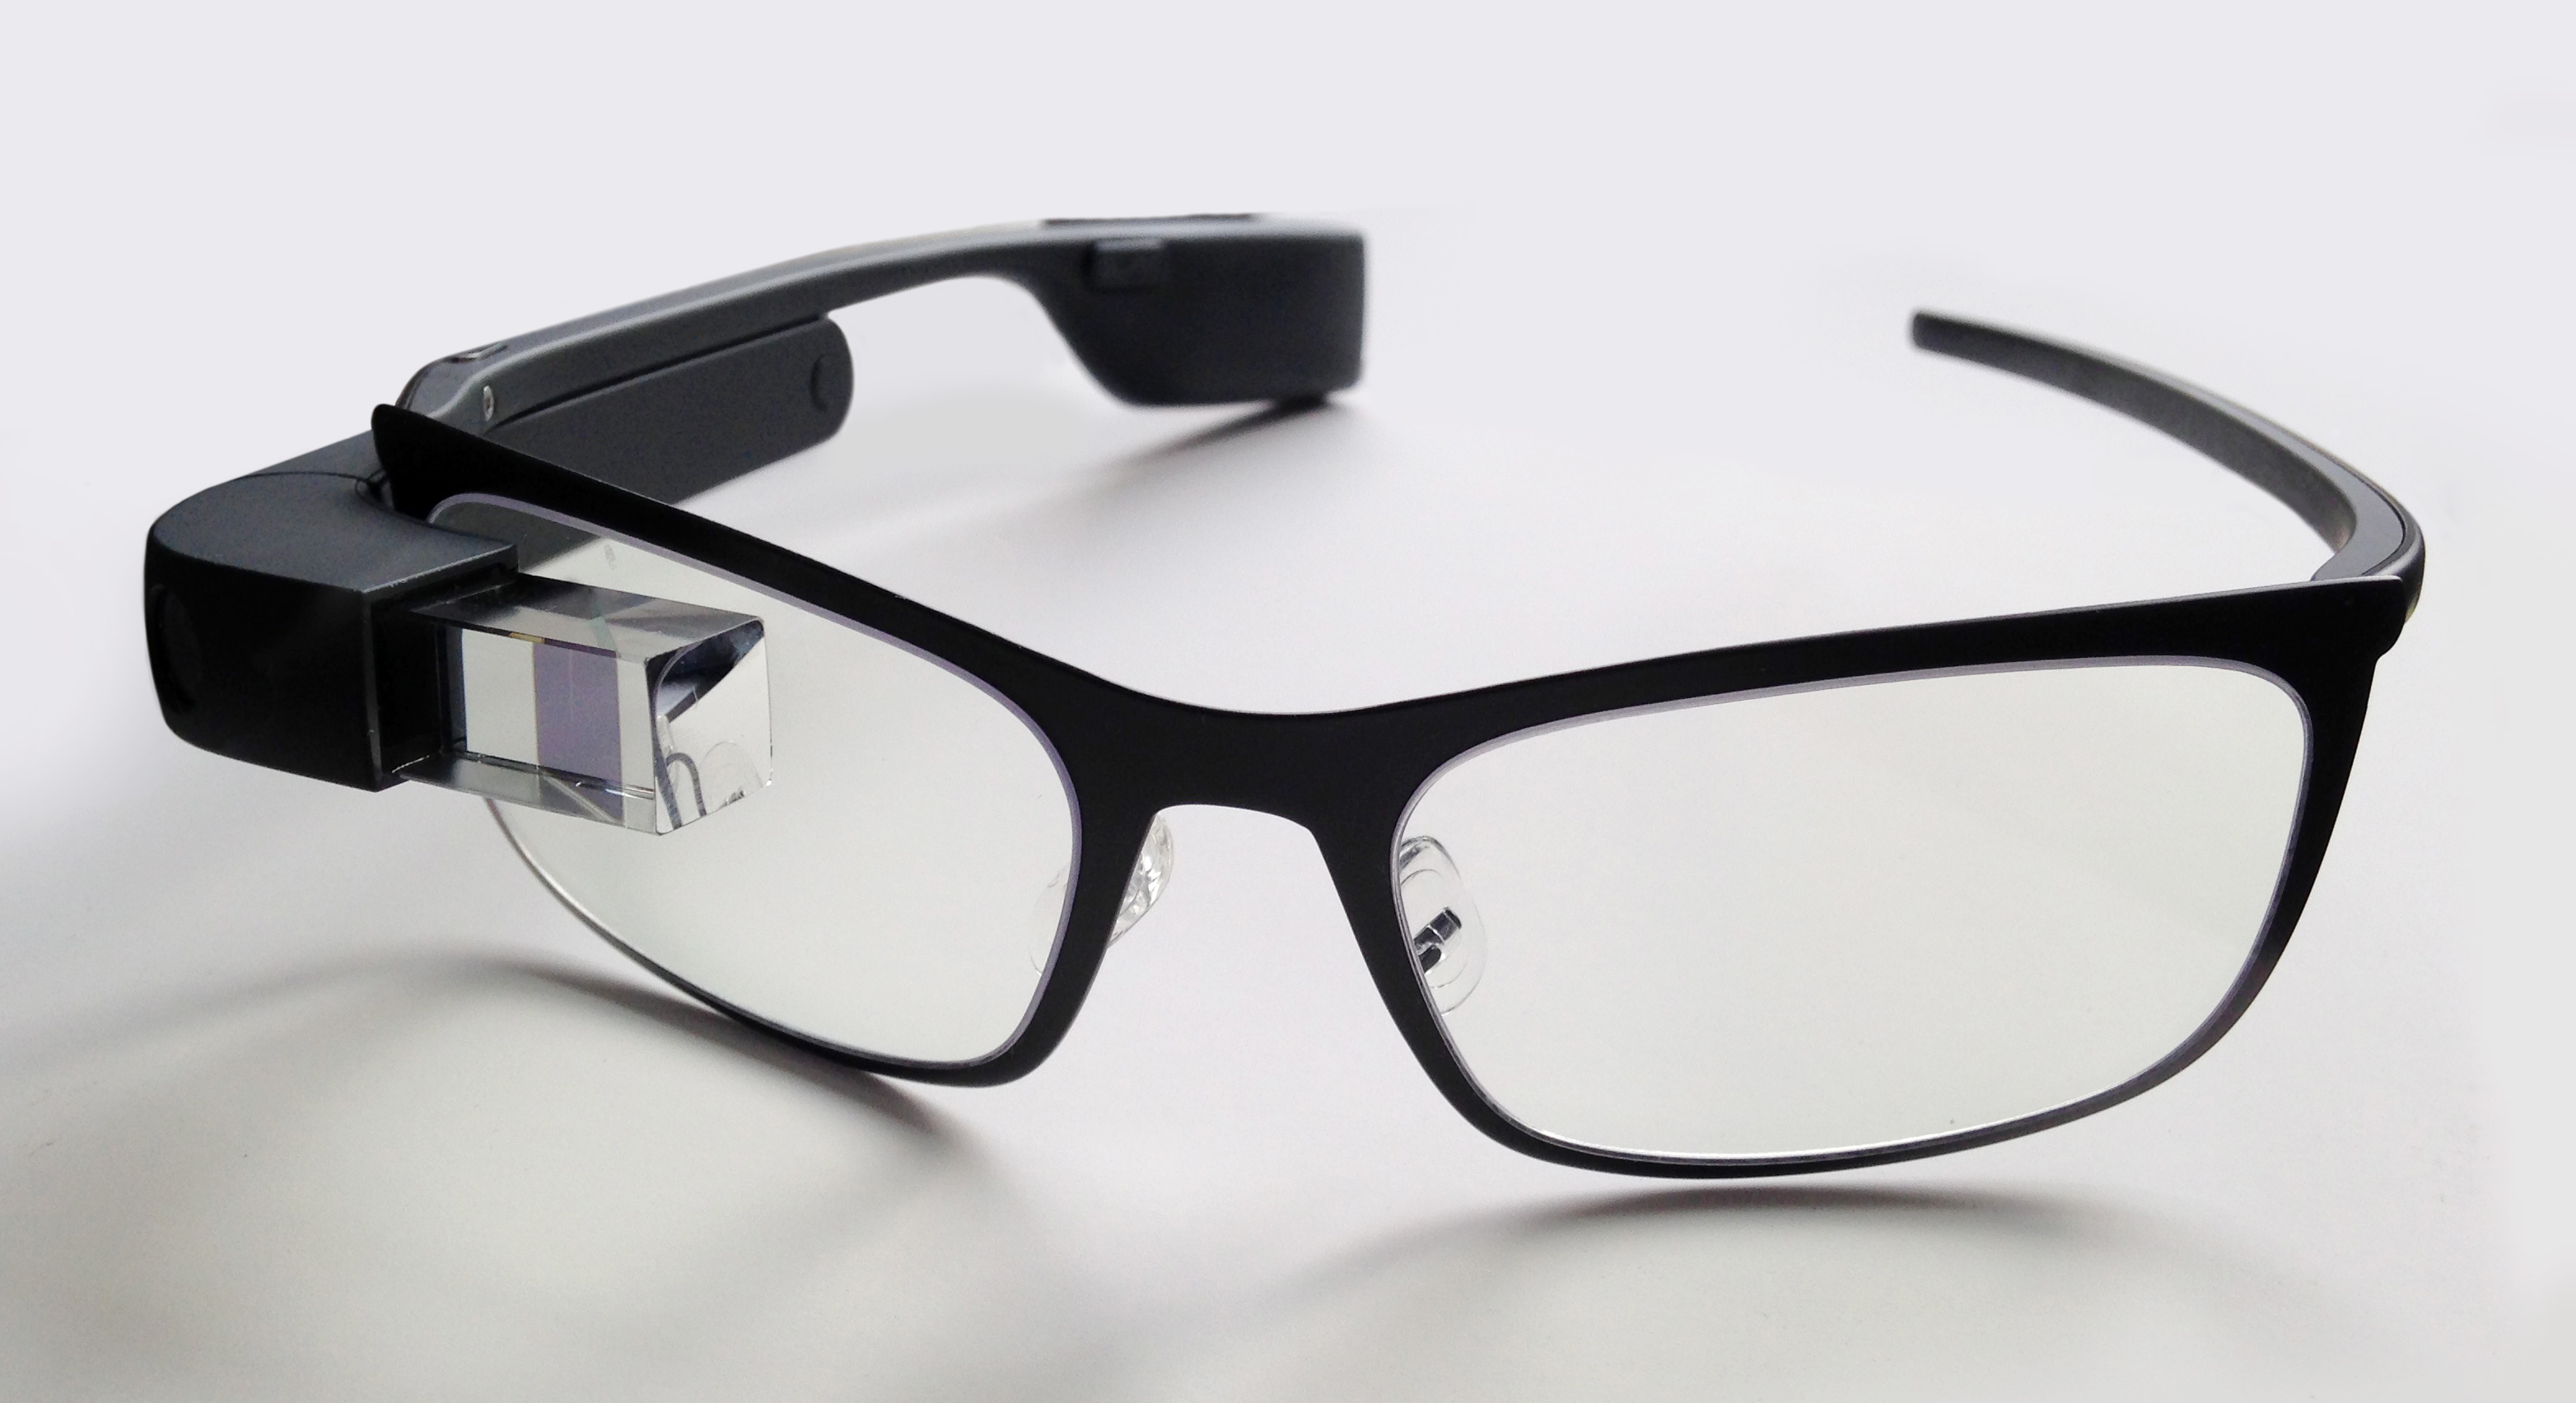 Geek insider, geekinsider, geekinsider. Com,, google glass: reading your mind with the help of a new app, news